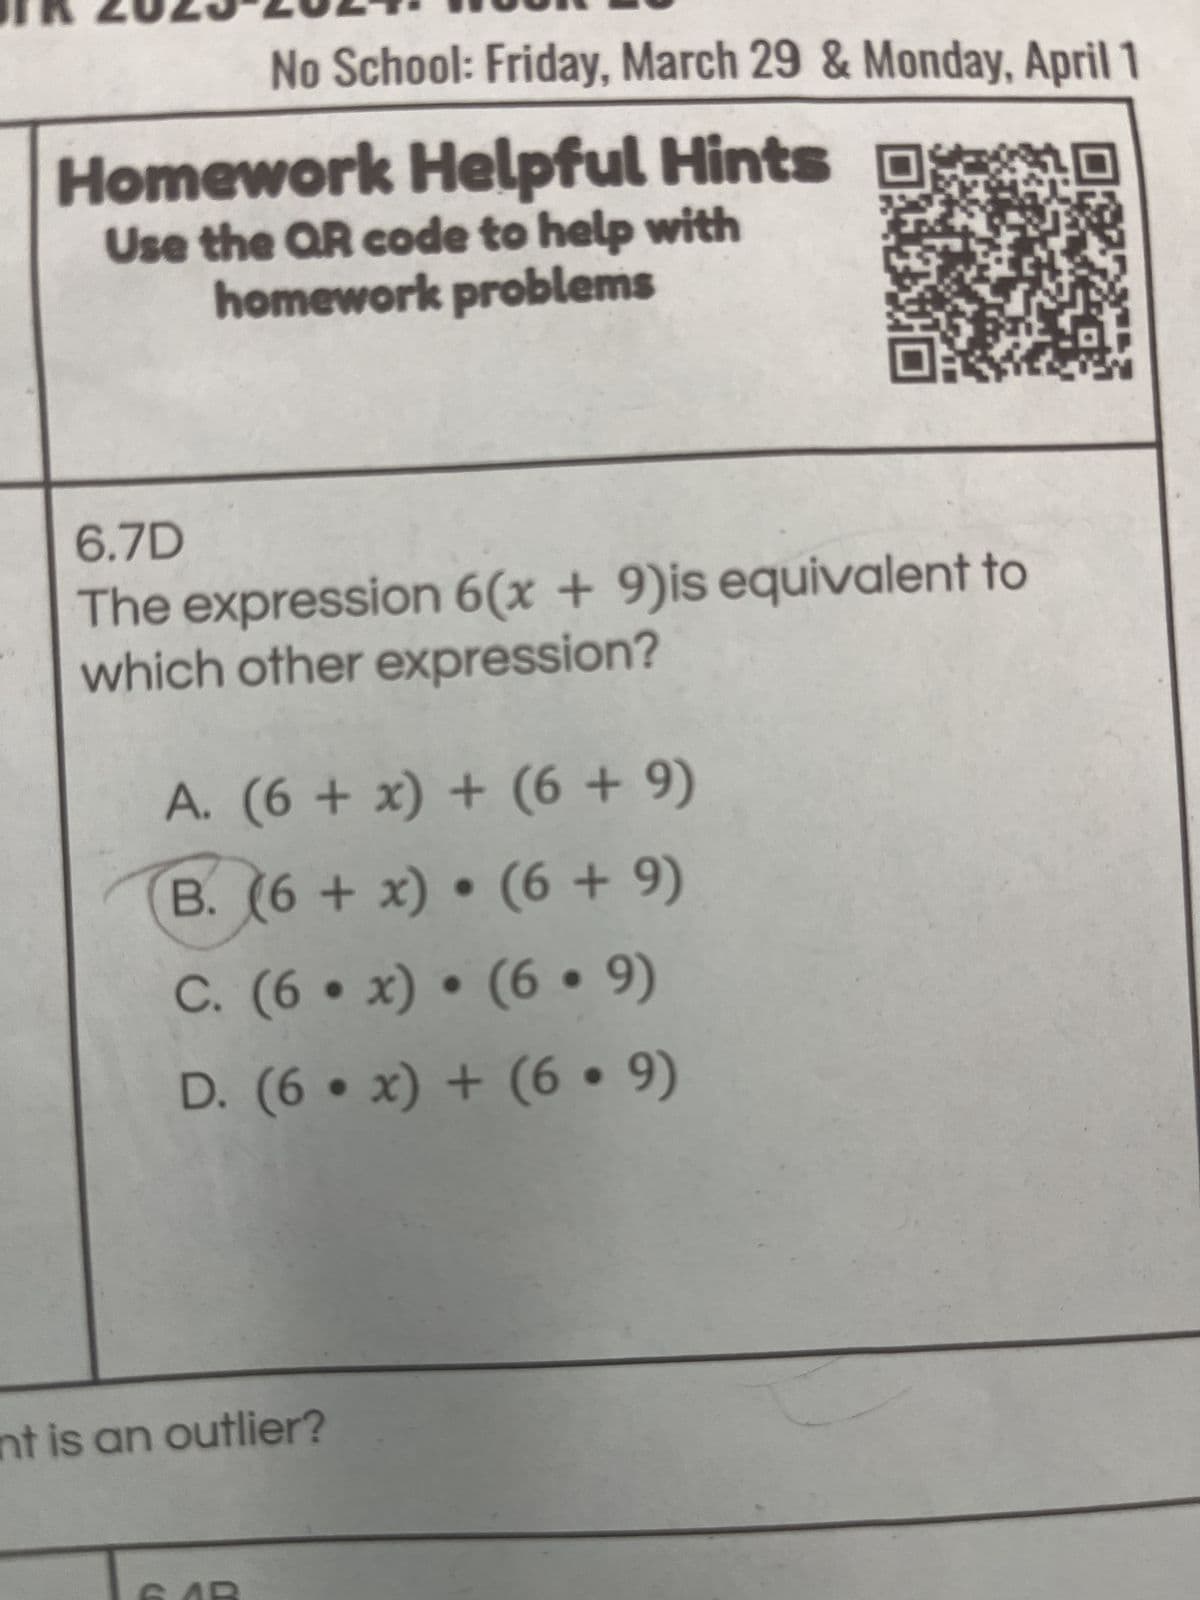 FR 2023 2024
No School: Friday, March 29 & Monday, April 1
Homework Helpful Hints
Use the QR code to help with
homework problems
6.7D
The expression 6(x+9)is equivalent to
which other expression?
A. (6 + x) + (6+9)
B. (6+x) (6+9)
C. (6x) • (6·9)
D. (6x)+(69)
nt is an outlier?